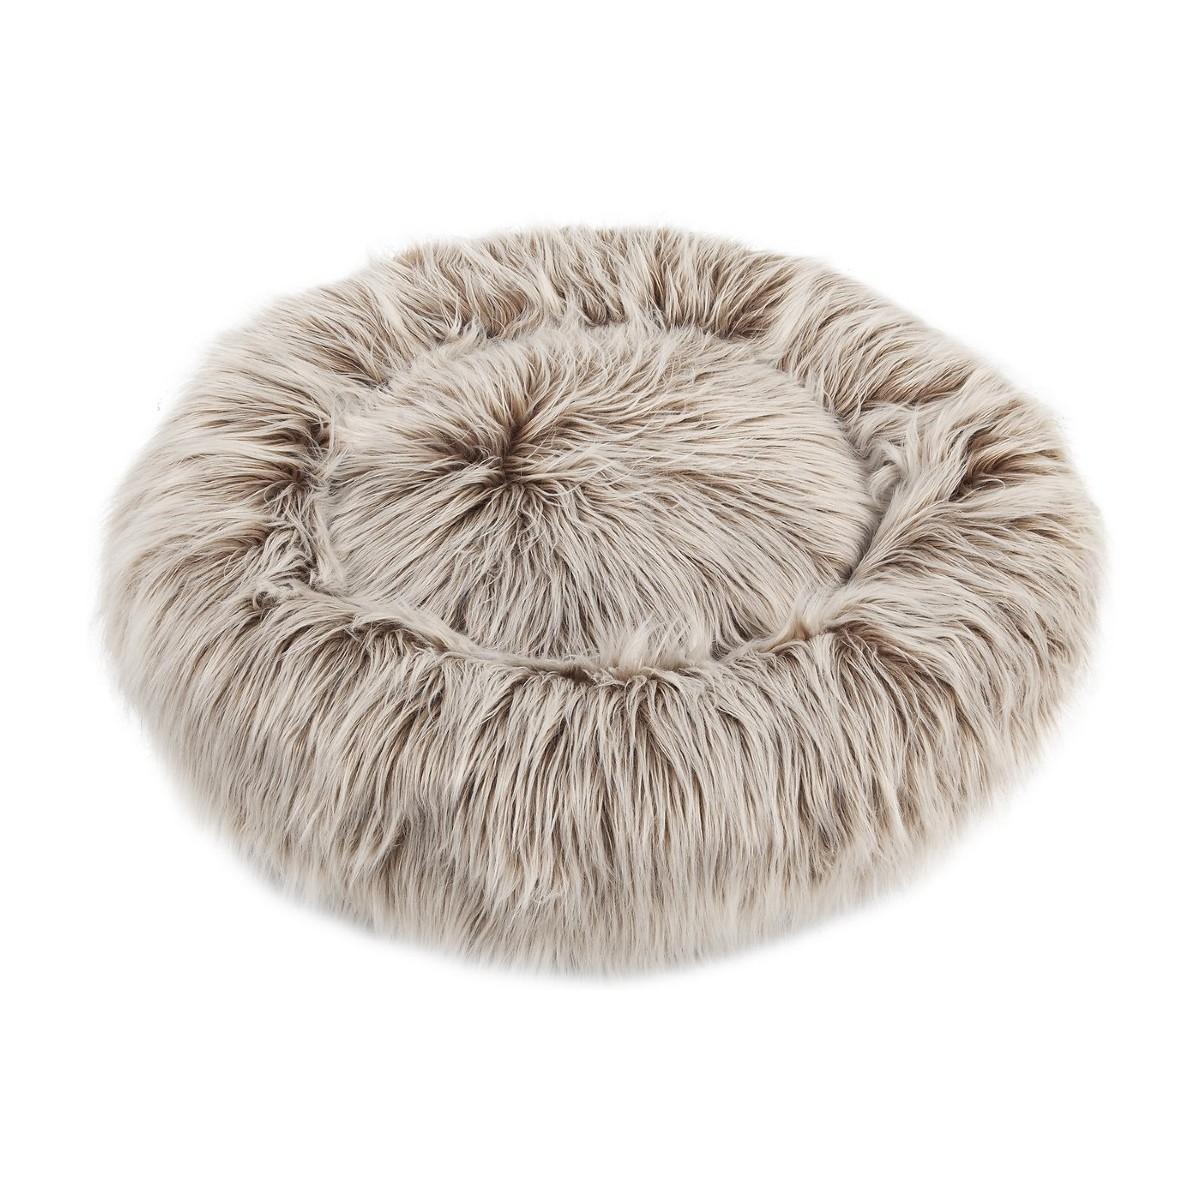 SnooZZy Glam Pet Donut Lounger Dog Bed